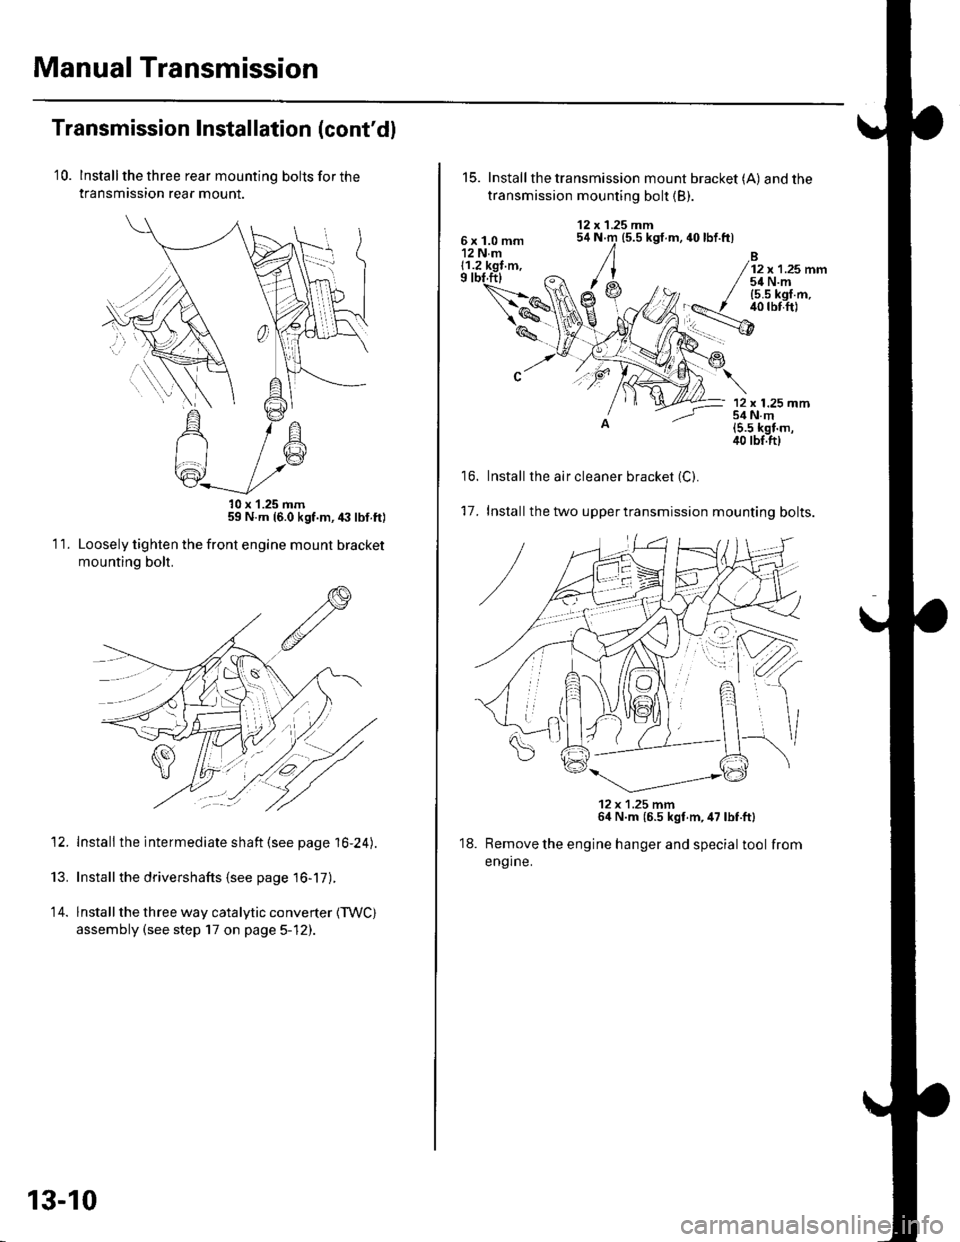 HONDA CIVIC 2003 7.G Owners Guide Manual Transmission
Transmission Installation (contdl
10. Installthe three rear mounting bolls for the
transmission rear mount.
59 N.m (6.0 kgf.m,43 tbf.ft)
Loosely tighten the front engine mount br